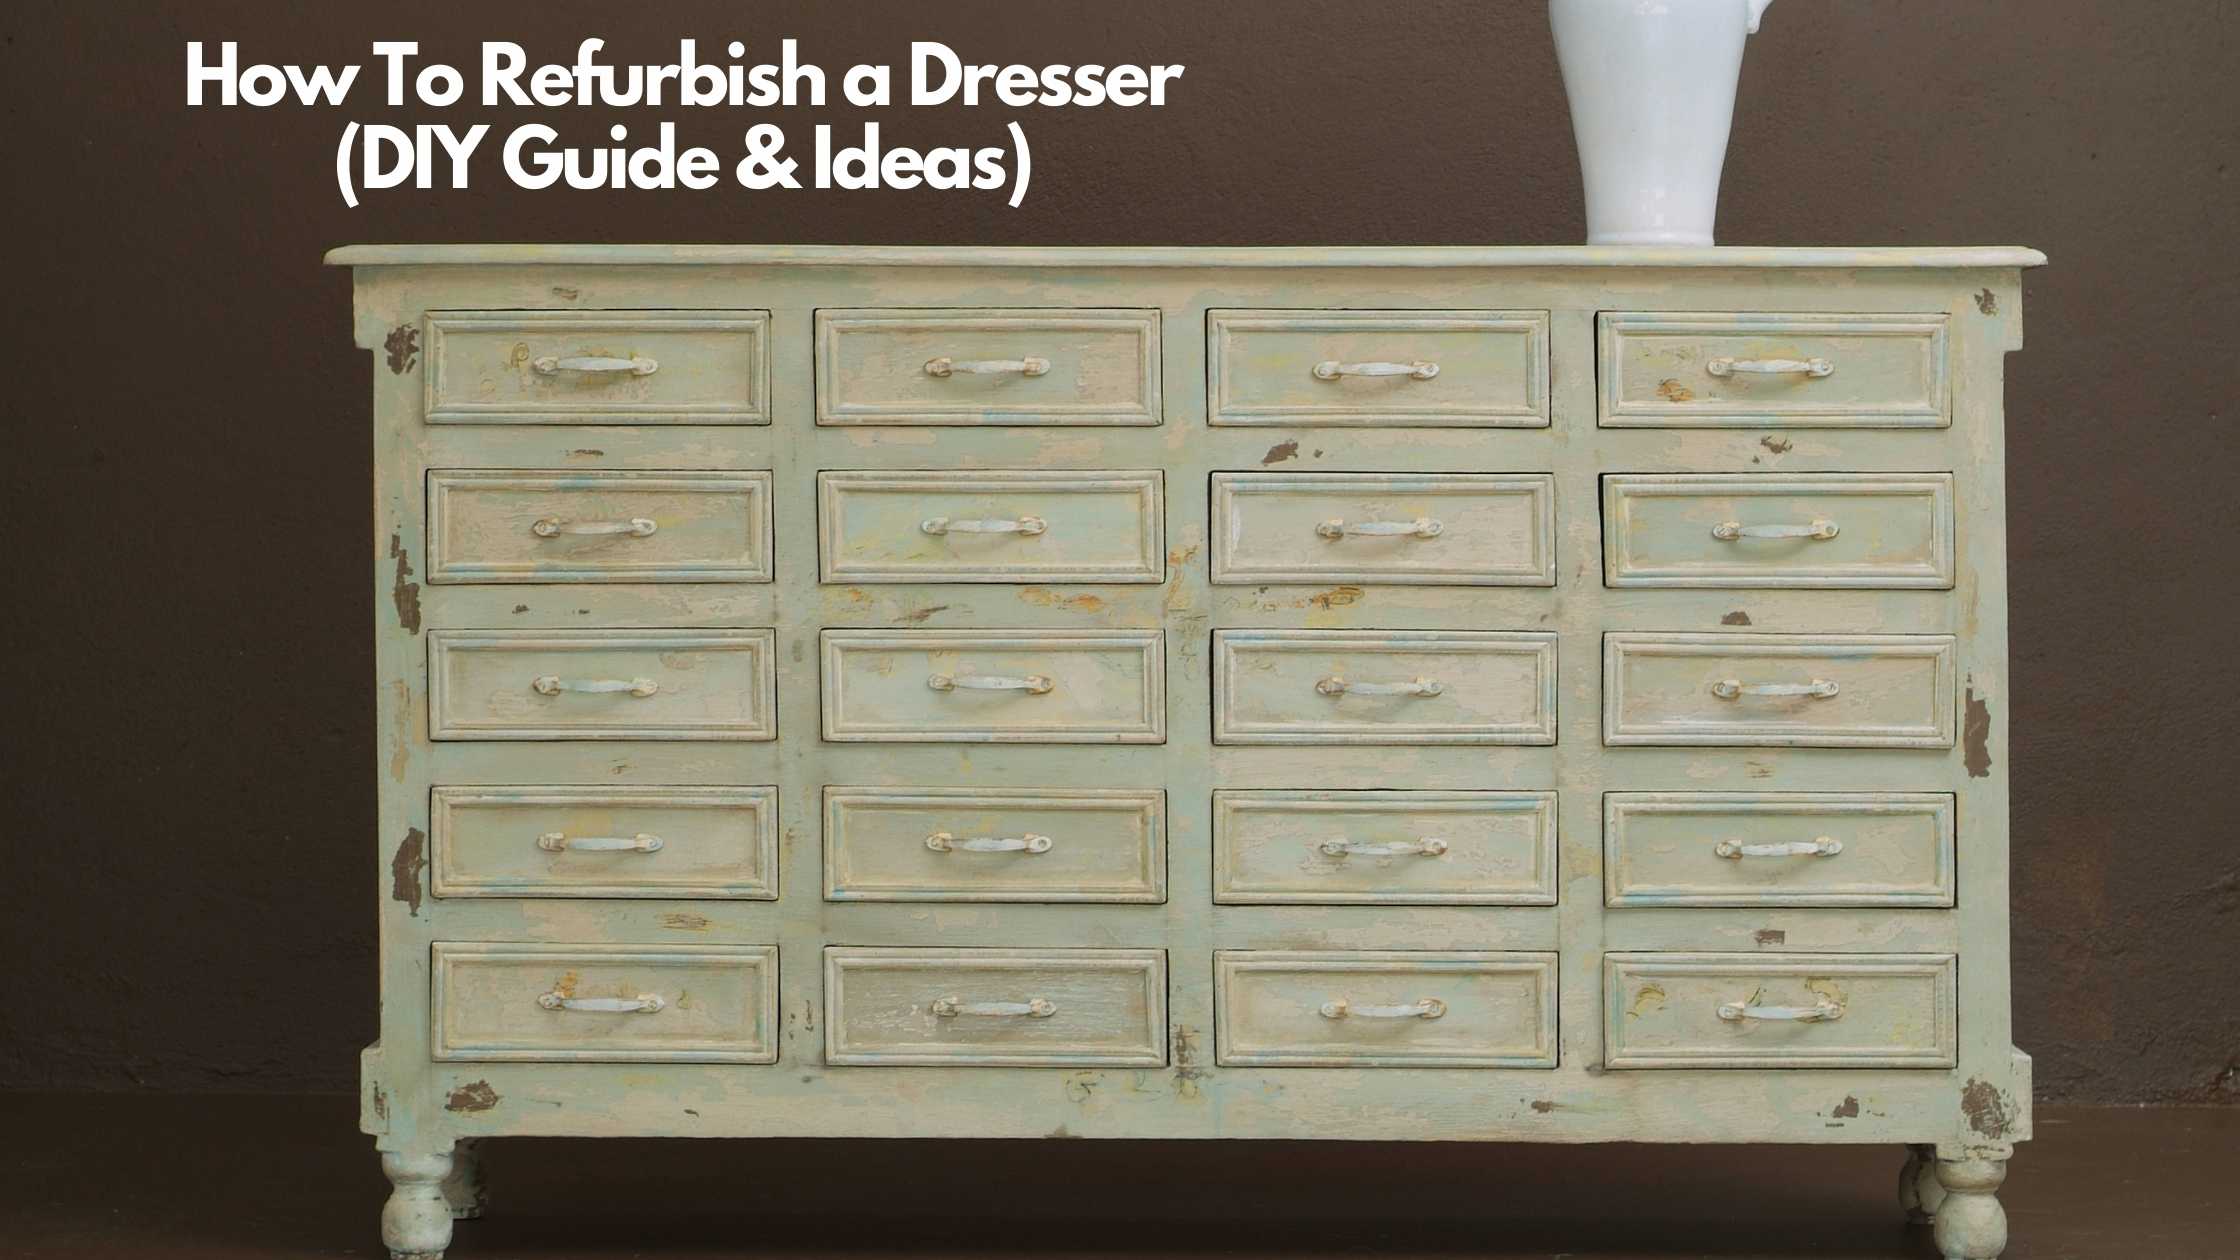 How to Refurbish a Dresser DIY Guide and Ideas